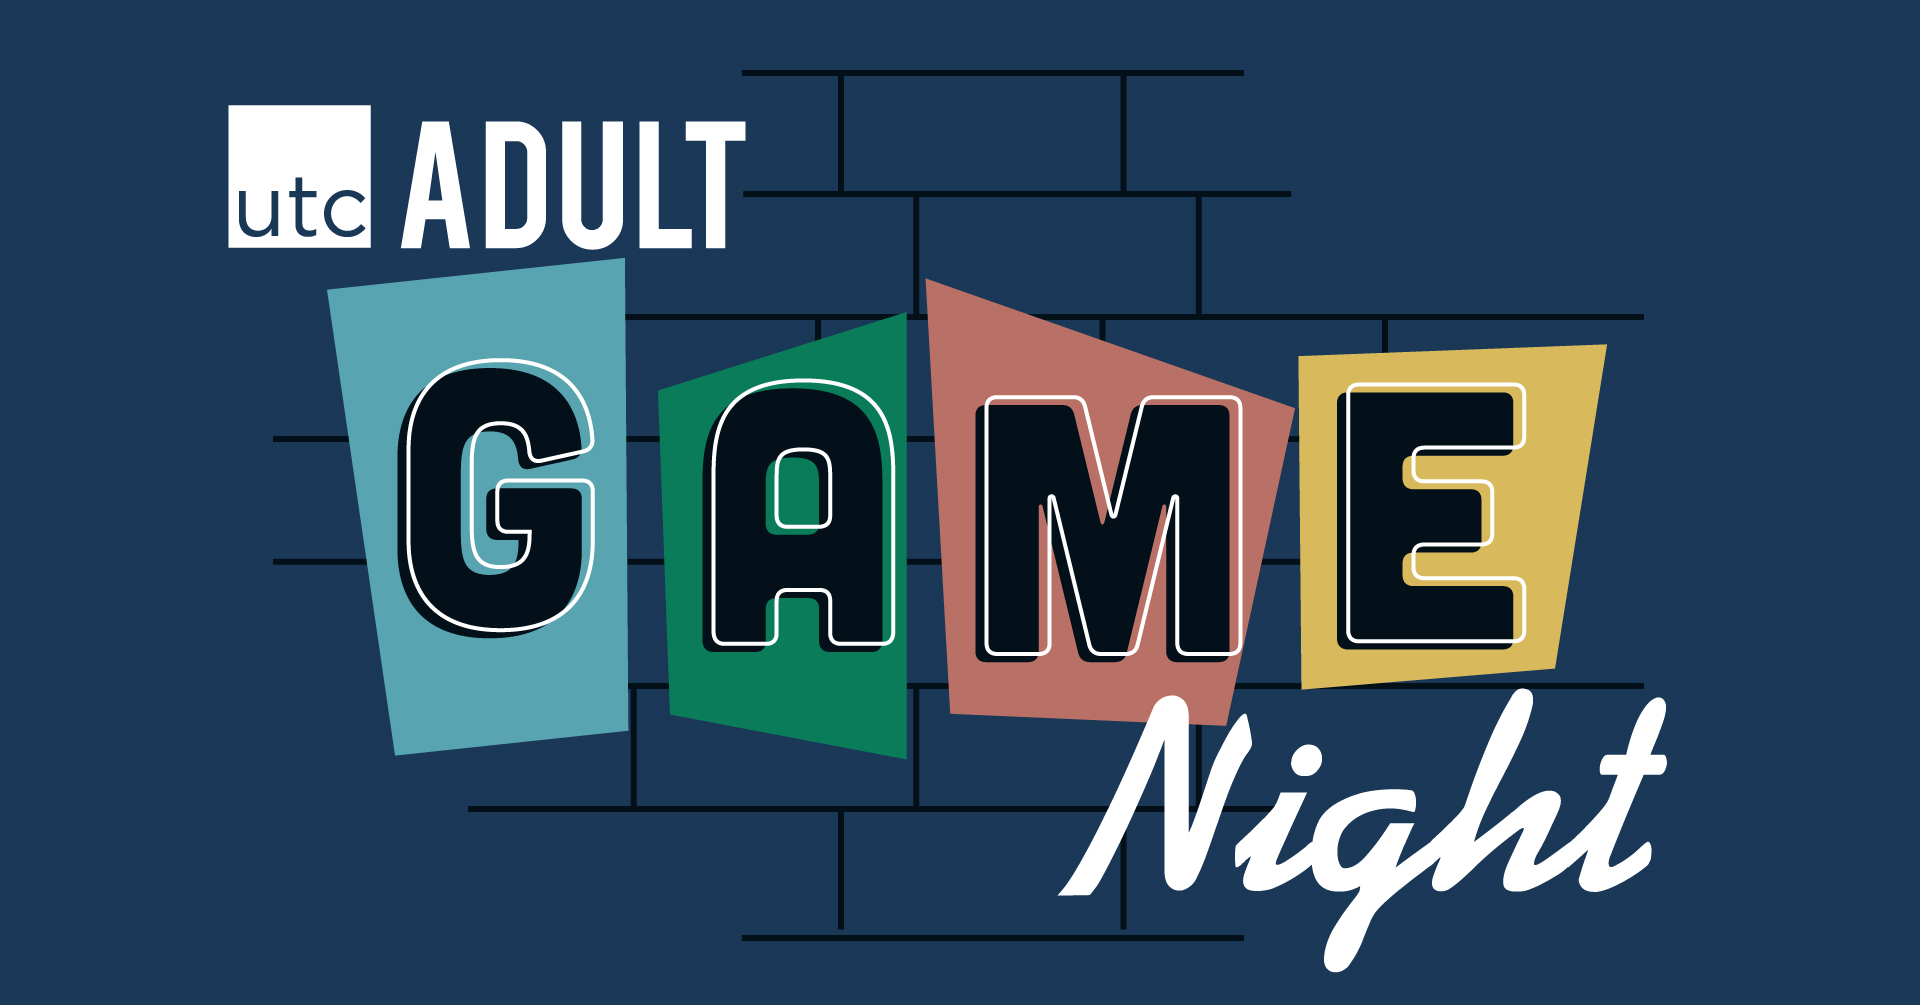 🎲 🌈 SAVE THE DATE: Join us for a free game night at The Center